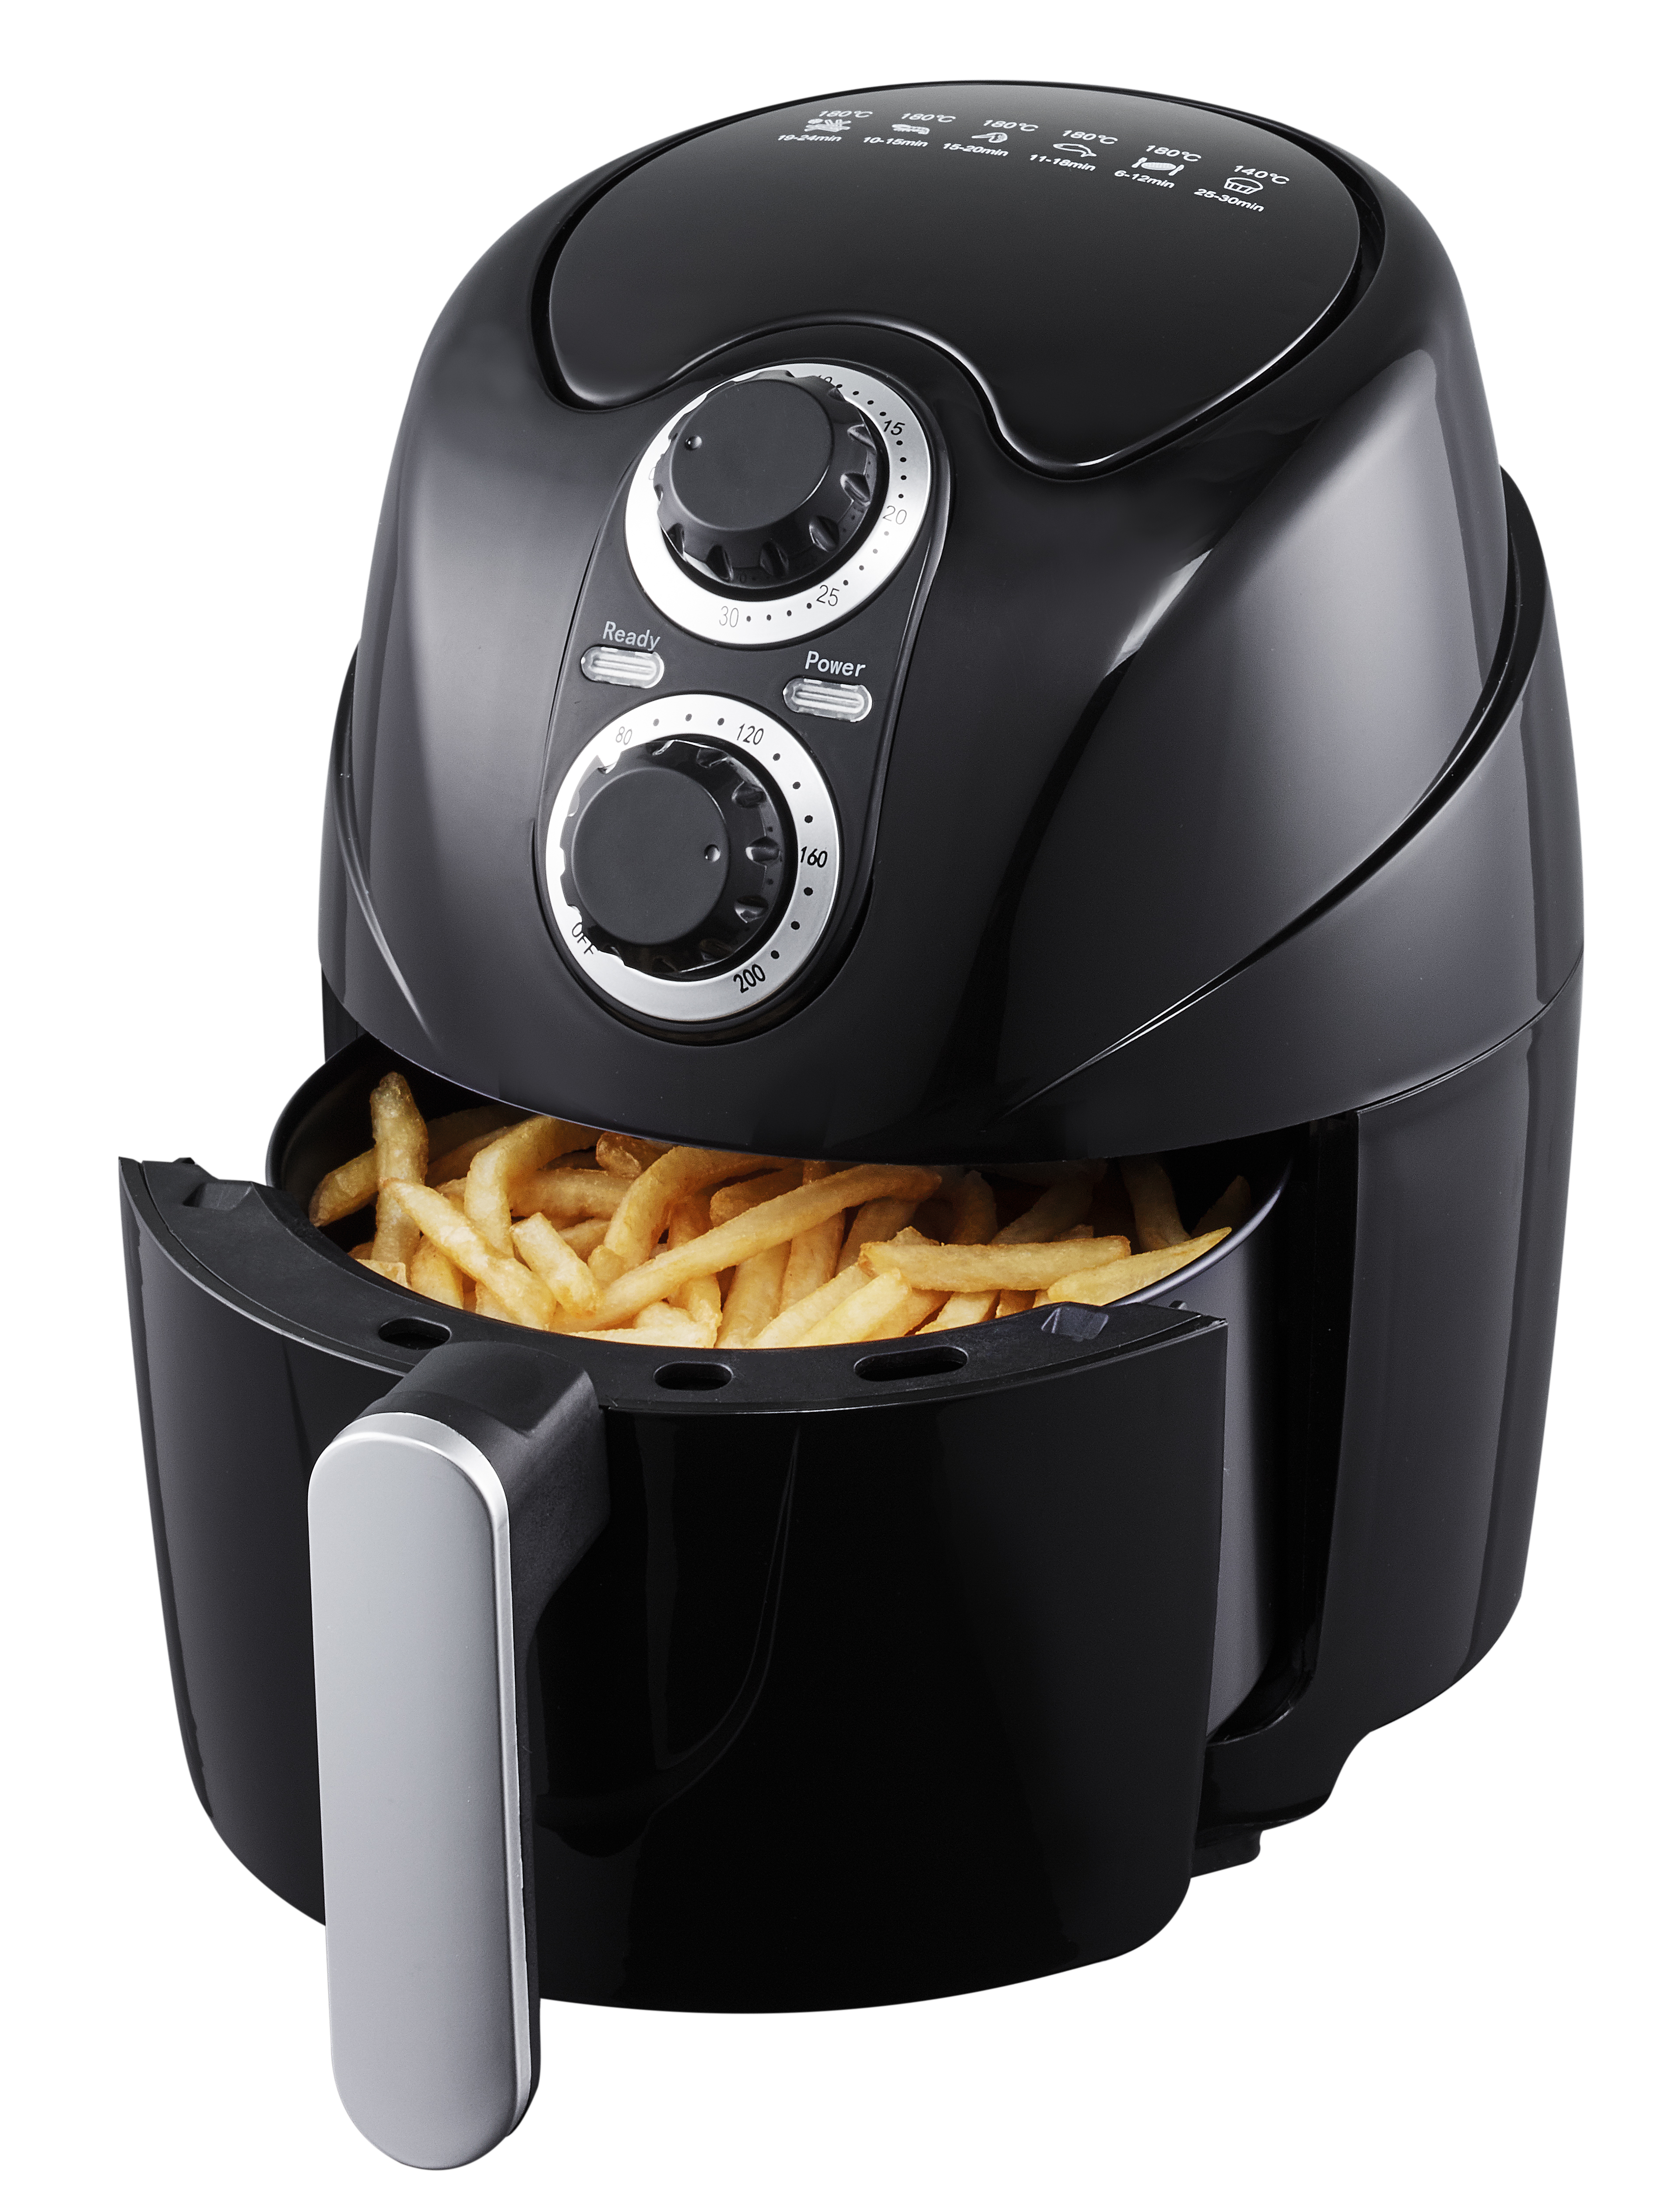 An air fryer | Source: Getty Images